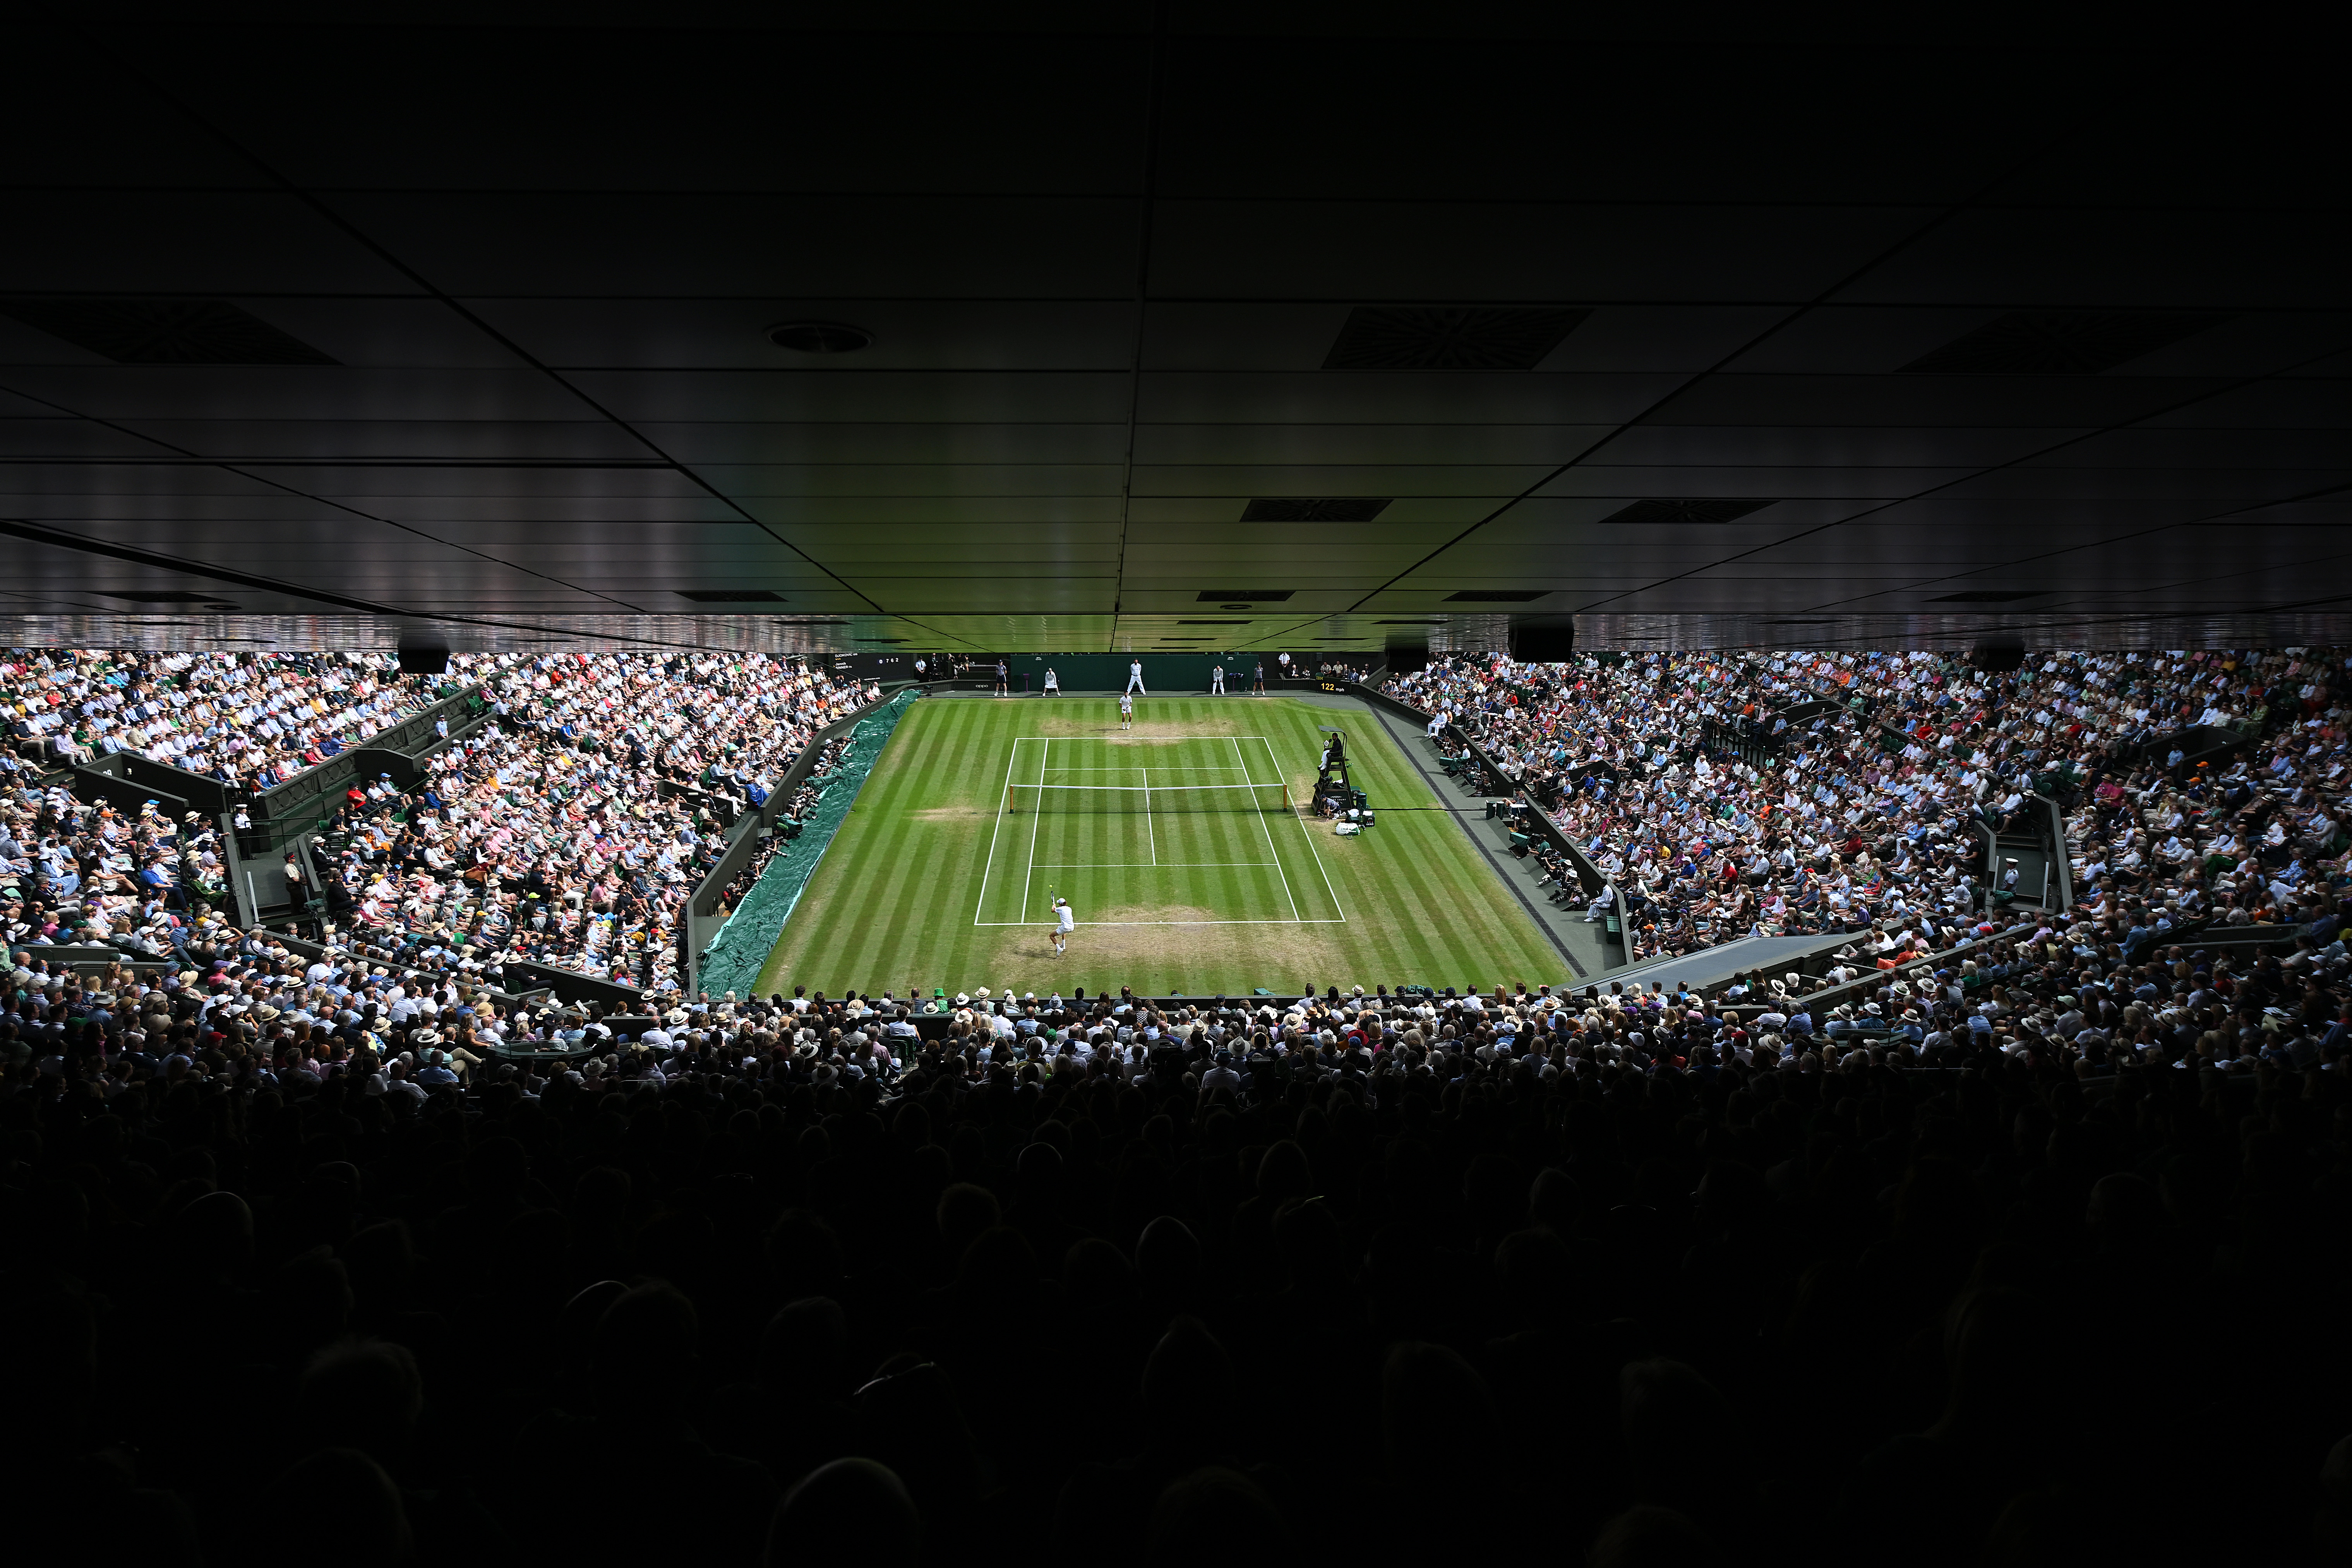 A general view as Jannik Sinner of Italy plays a forehand against Novak Djokovic of Serbia during their Men’s Singles Quarter Final match on day nine of The Championships Wimbledon 2022 at All England Lawn Tennis and Croquet Club on July 05, 2022 in London, England.